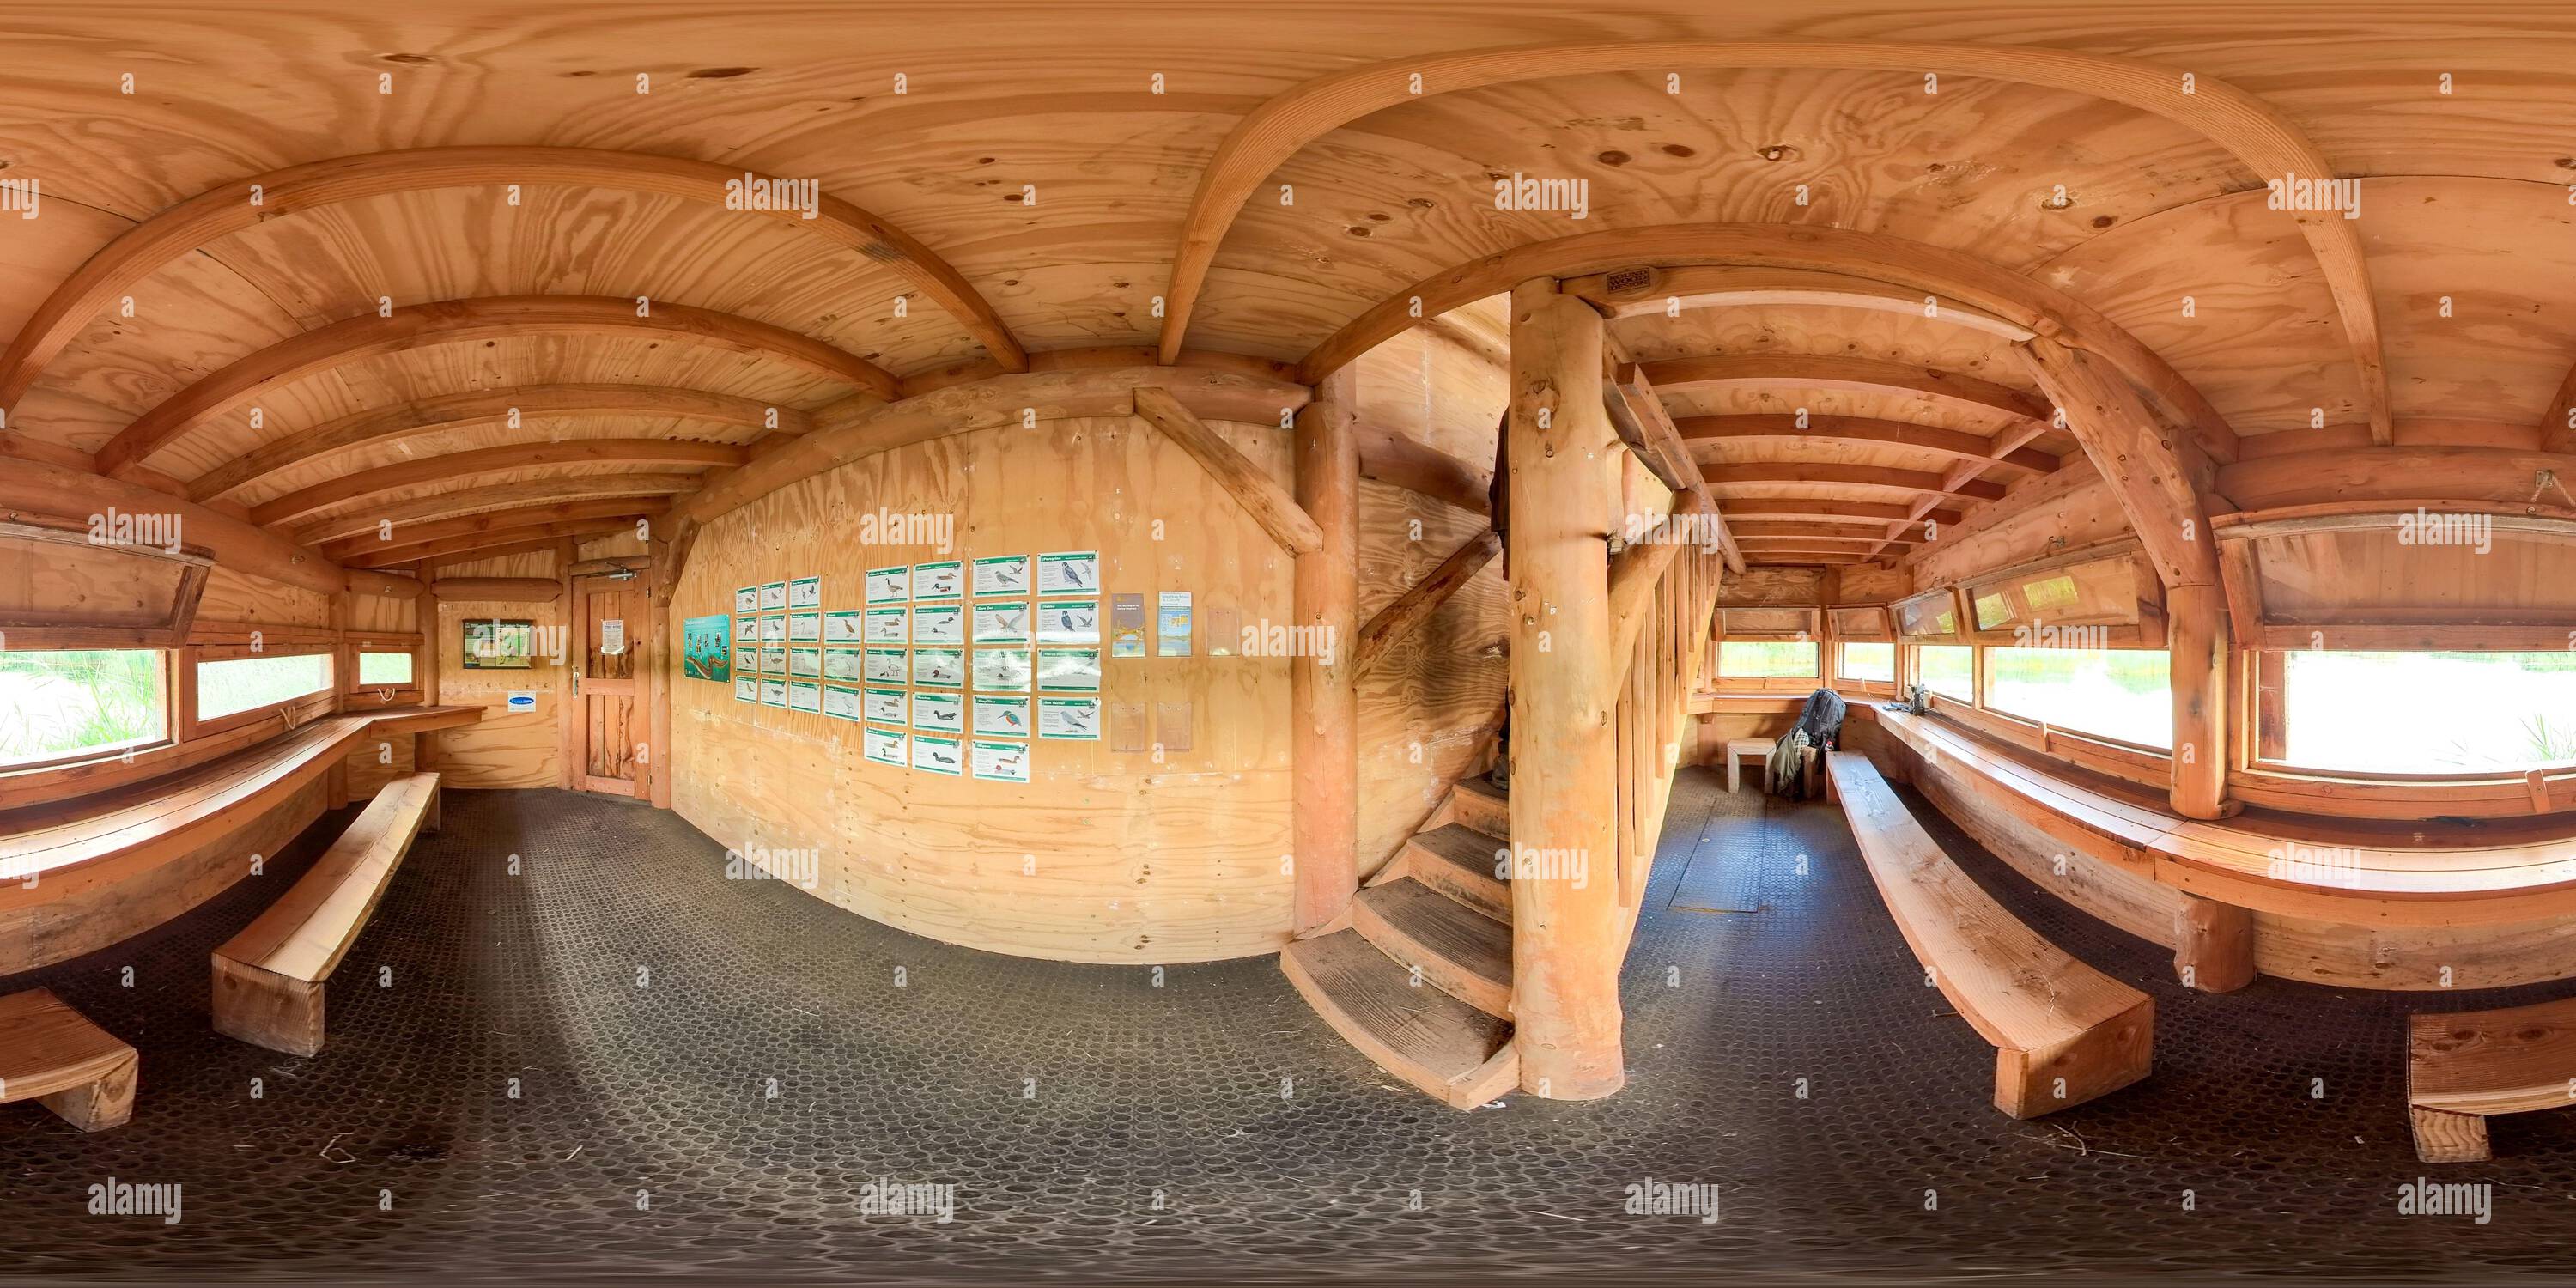 360 degree panoramic view of Interior of North Hide Ground Floor at Westhay Moor National Nature Reserve